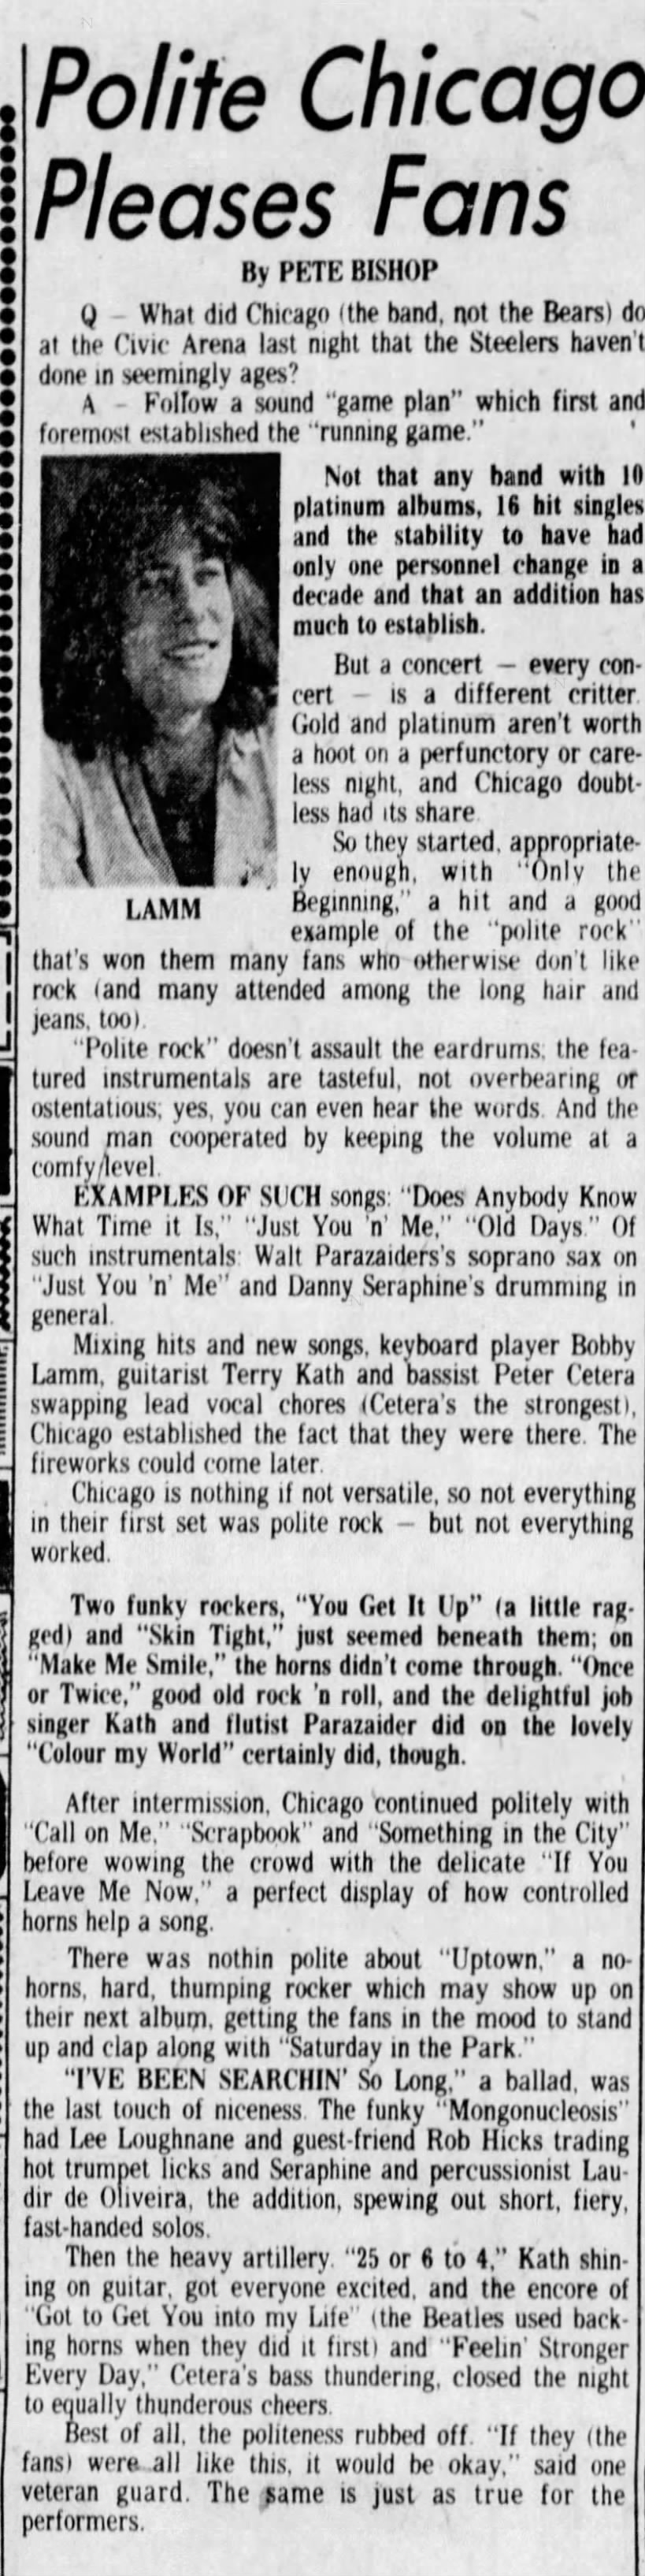 Pittsburgh Press 10-13-76 review